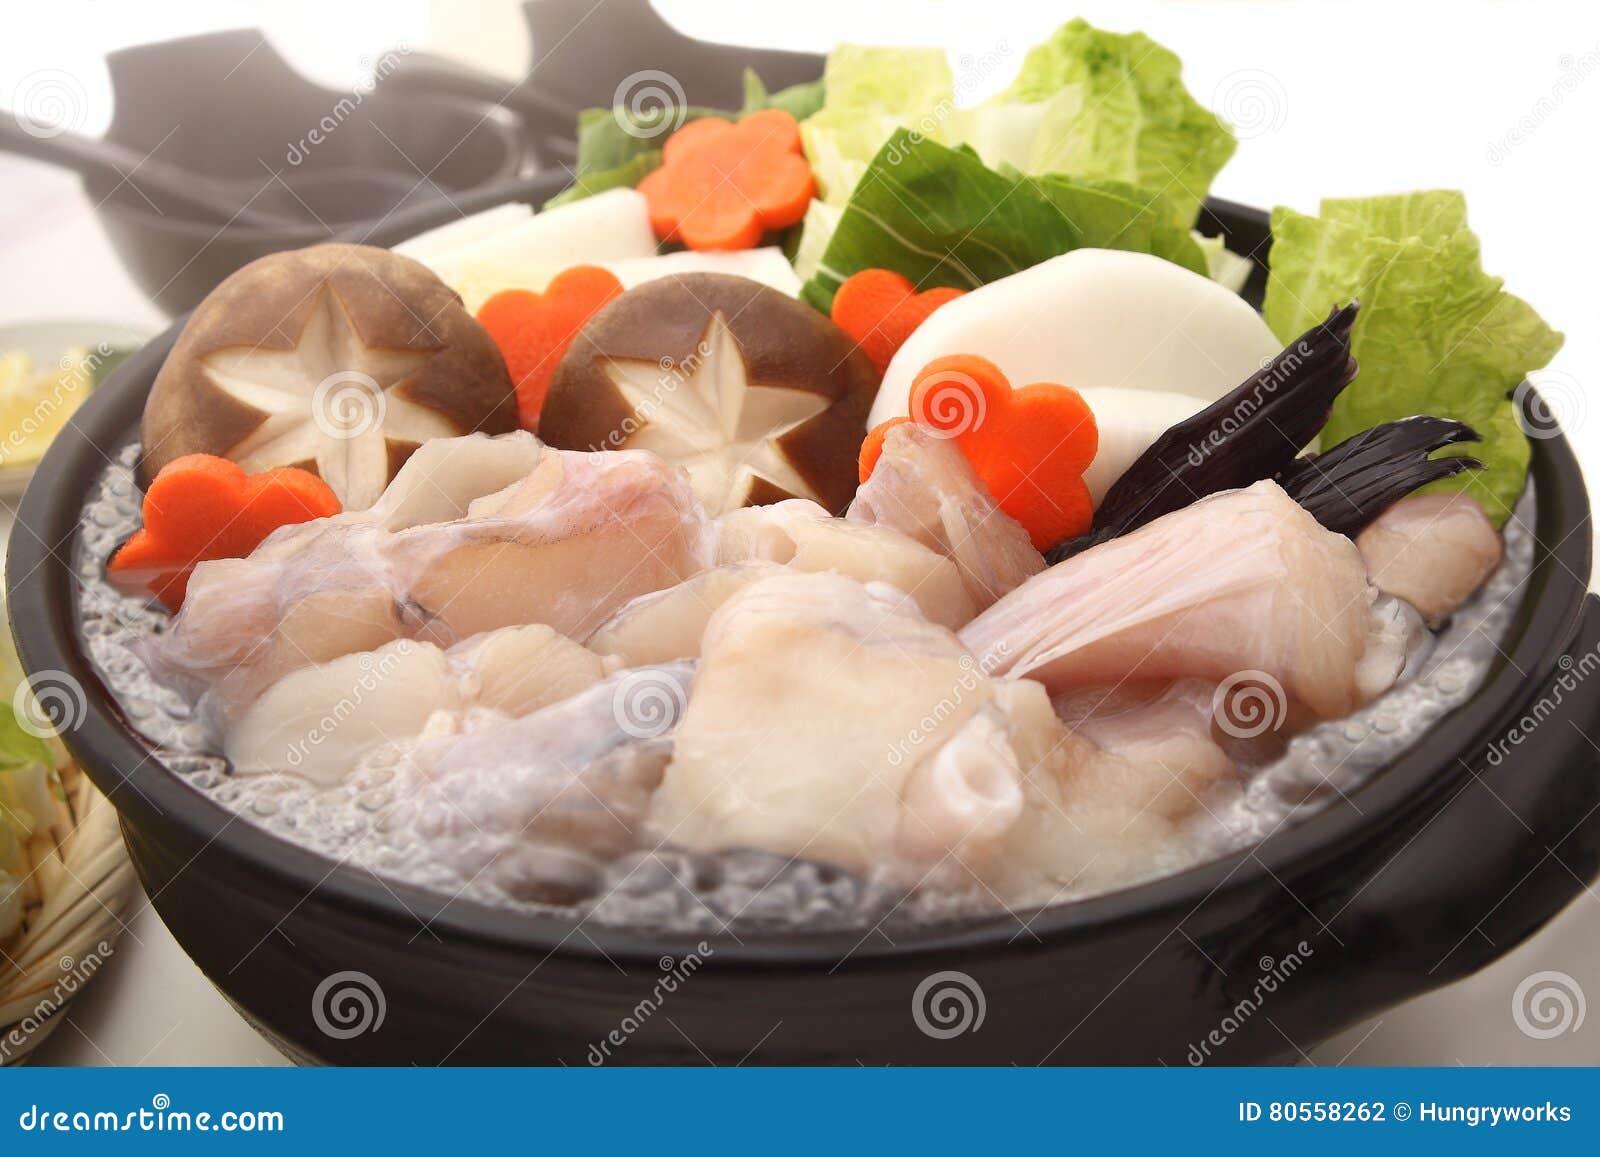 Can you steam fish in a pot фото 61